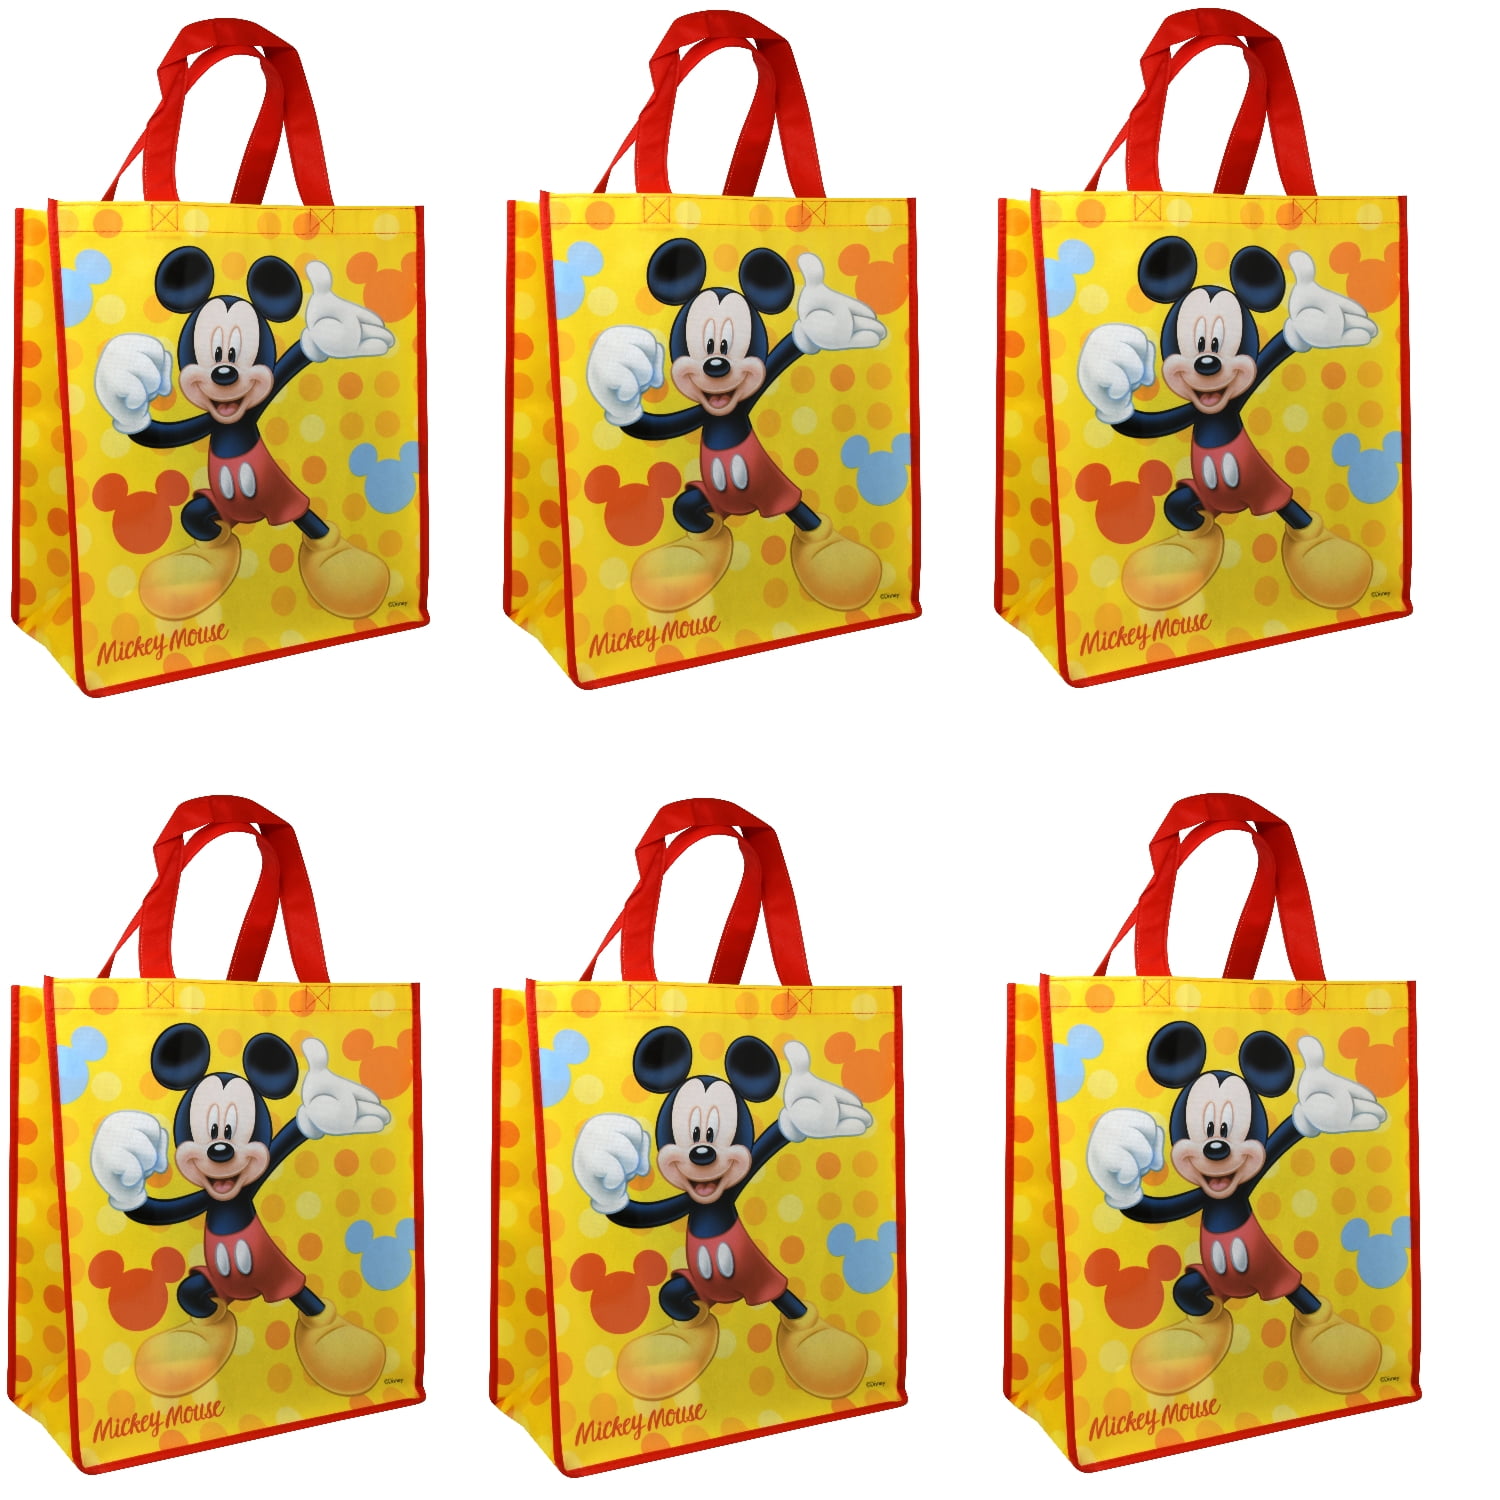 1st Birthday Mickey Mouse Gift Bag/Party Favor Gift Bags/4pcs | eBay